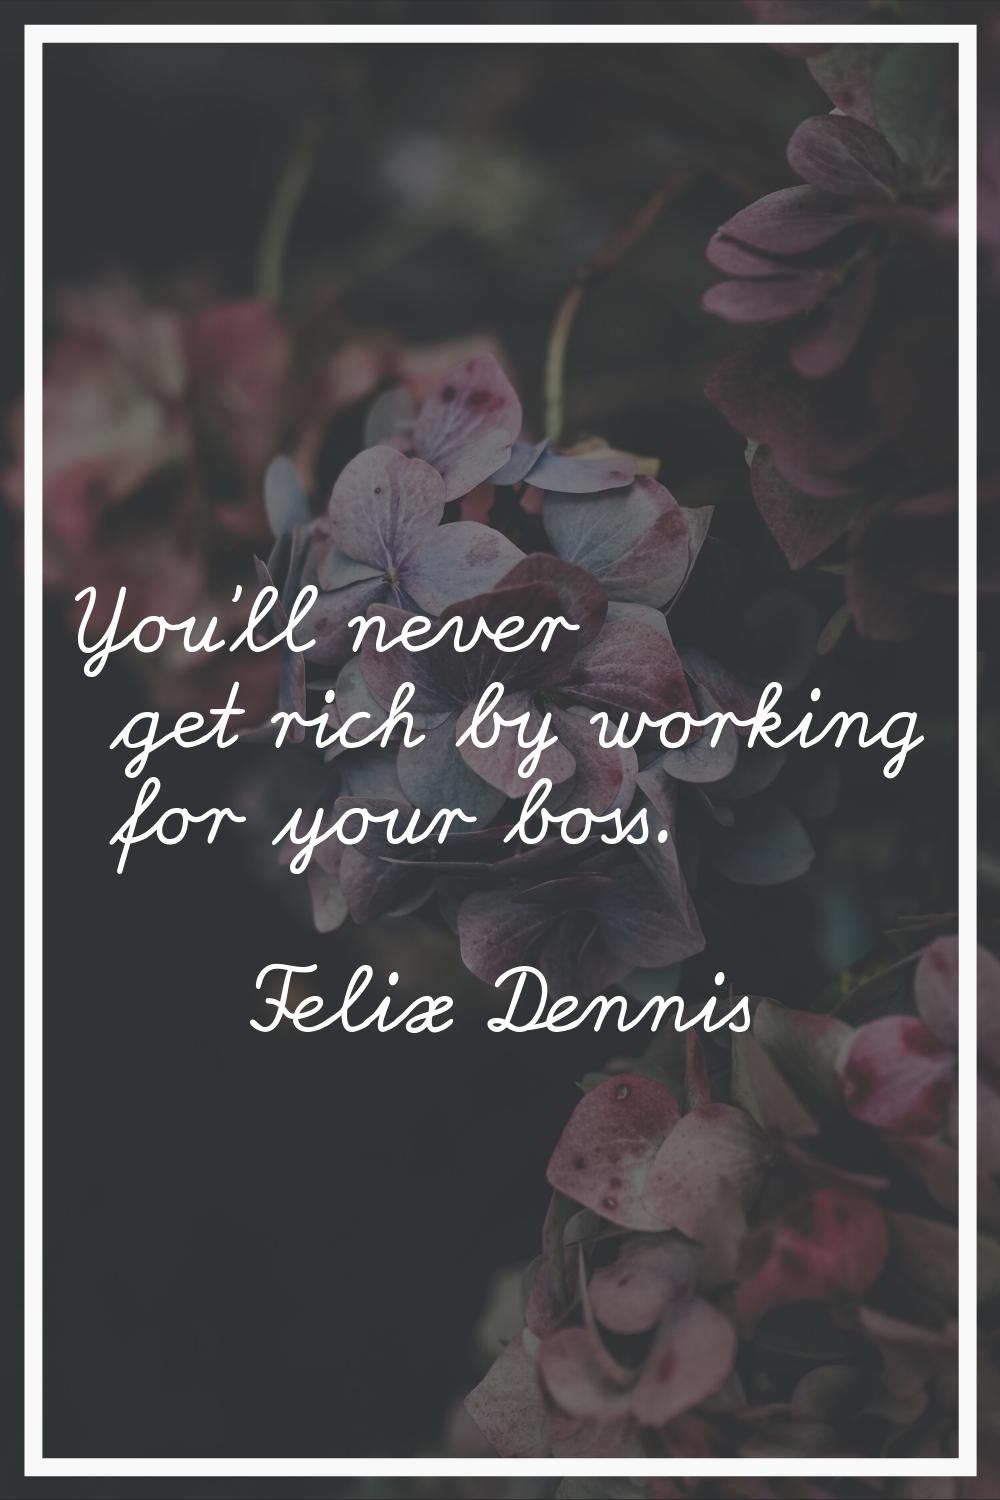 You'll never get rich by working for your boss.